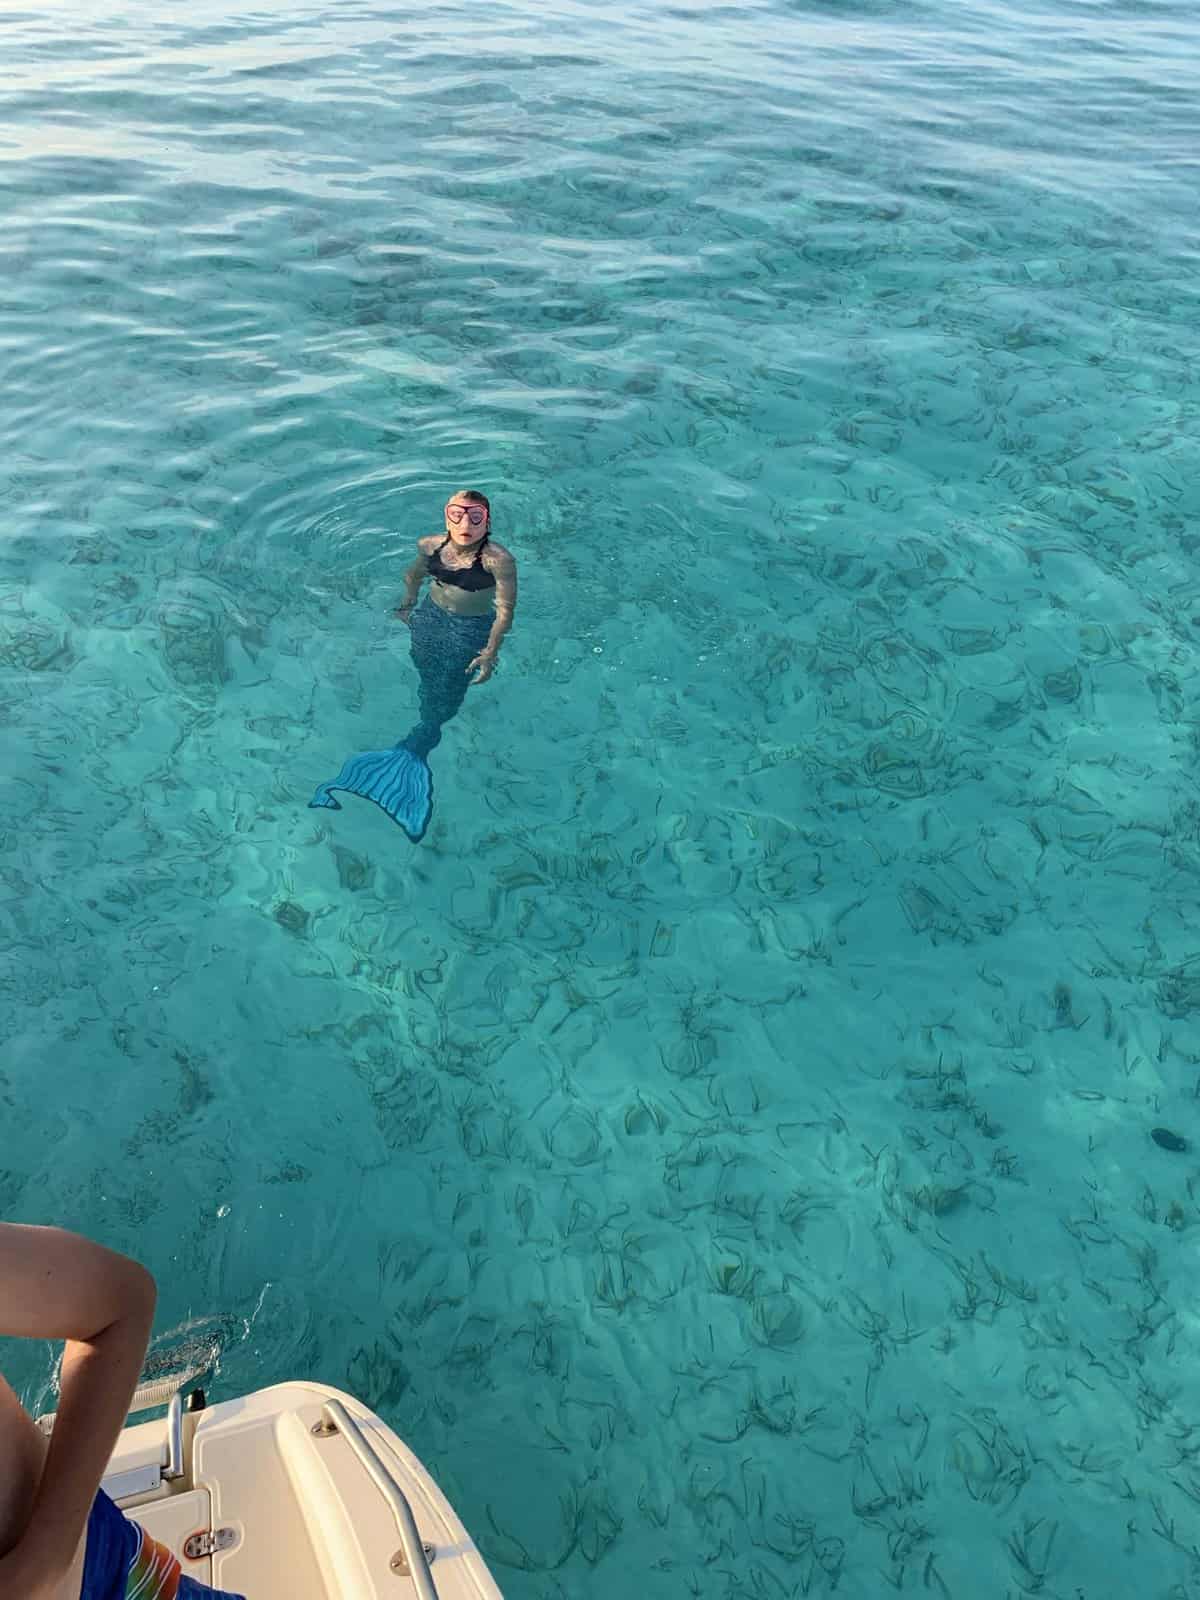 A girl with mermaid tail in crystal clear water